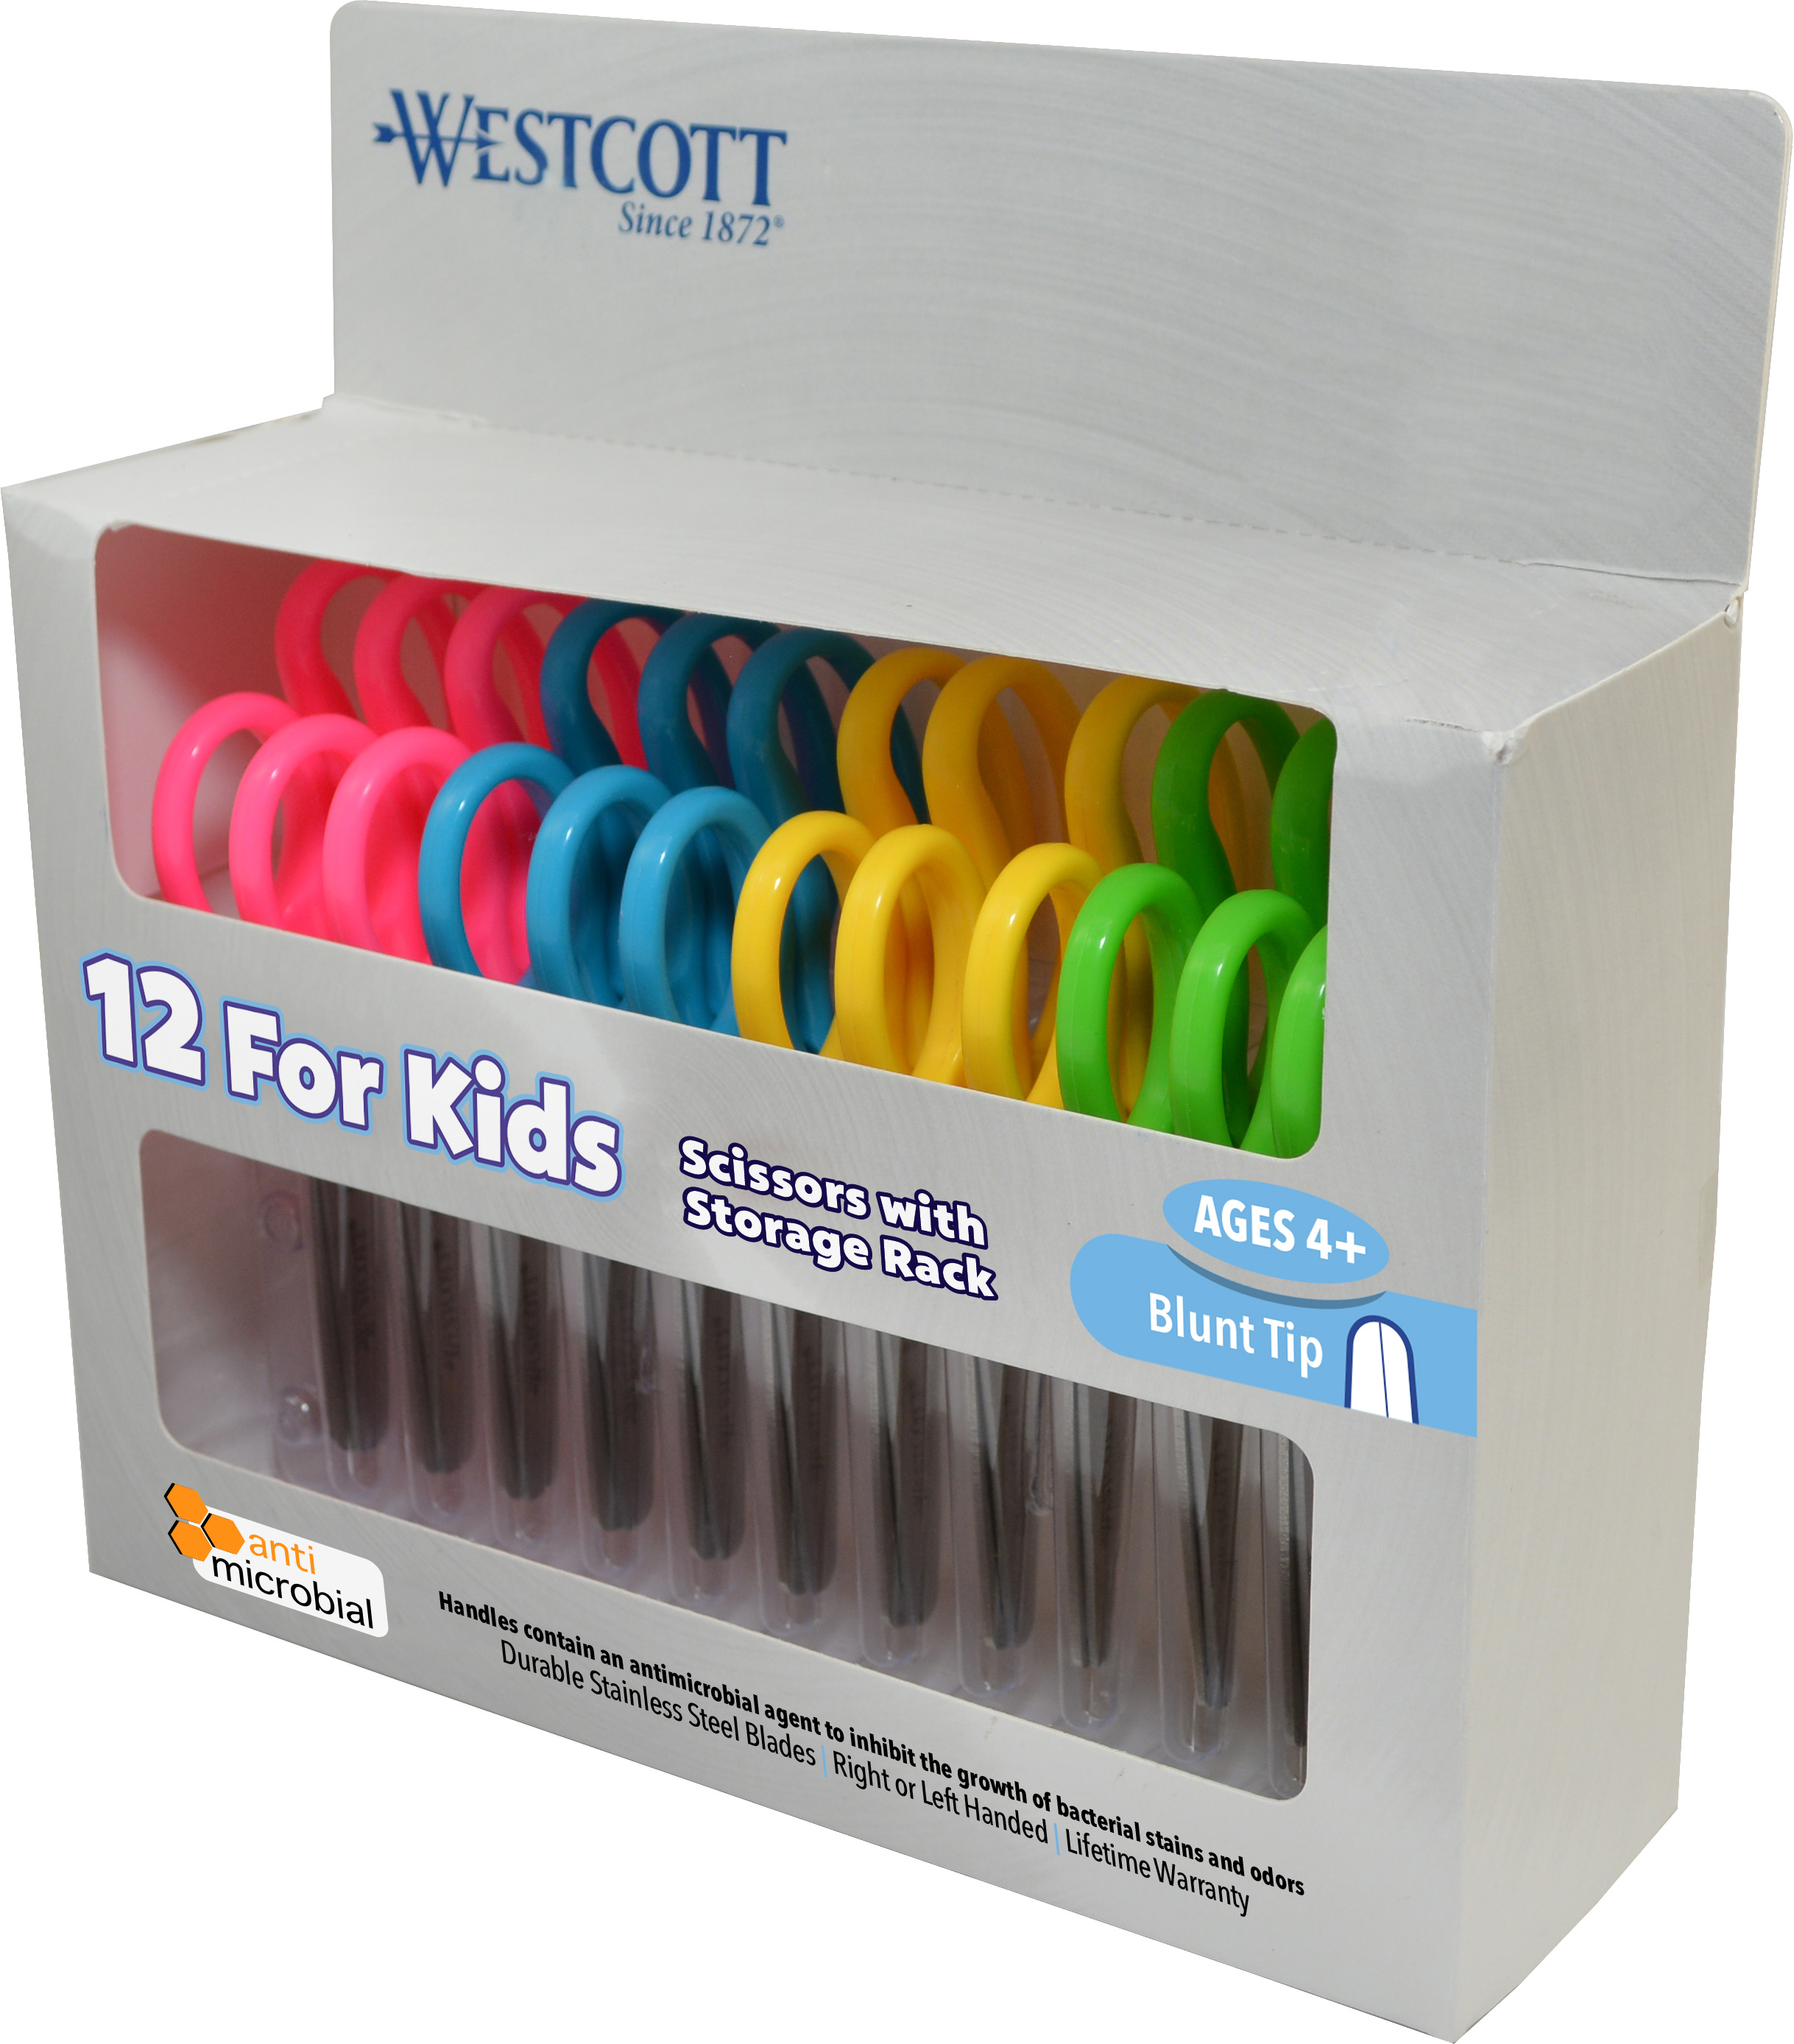 Westcott 5" School Pack of Kids Scissors with Anti-Microbial Protection, Blunt, Assorted Colors (Pack of 12) (14871)